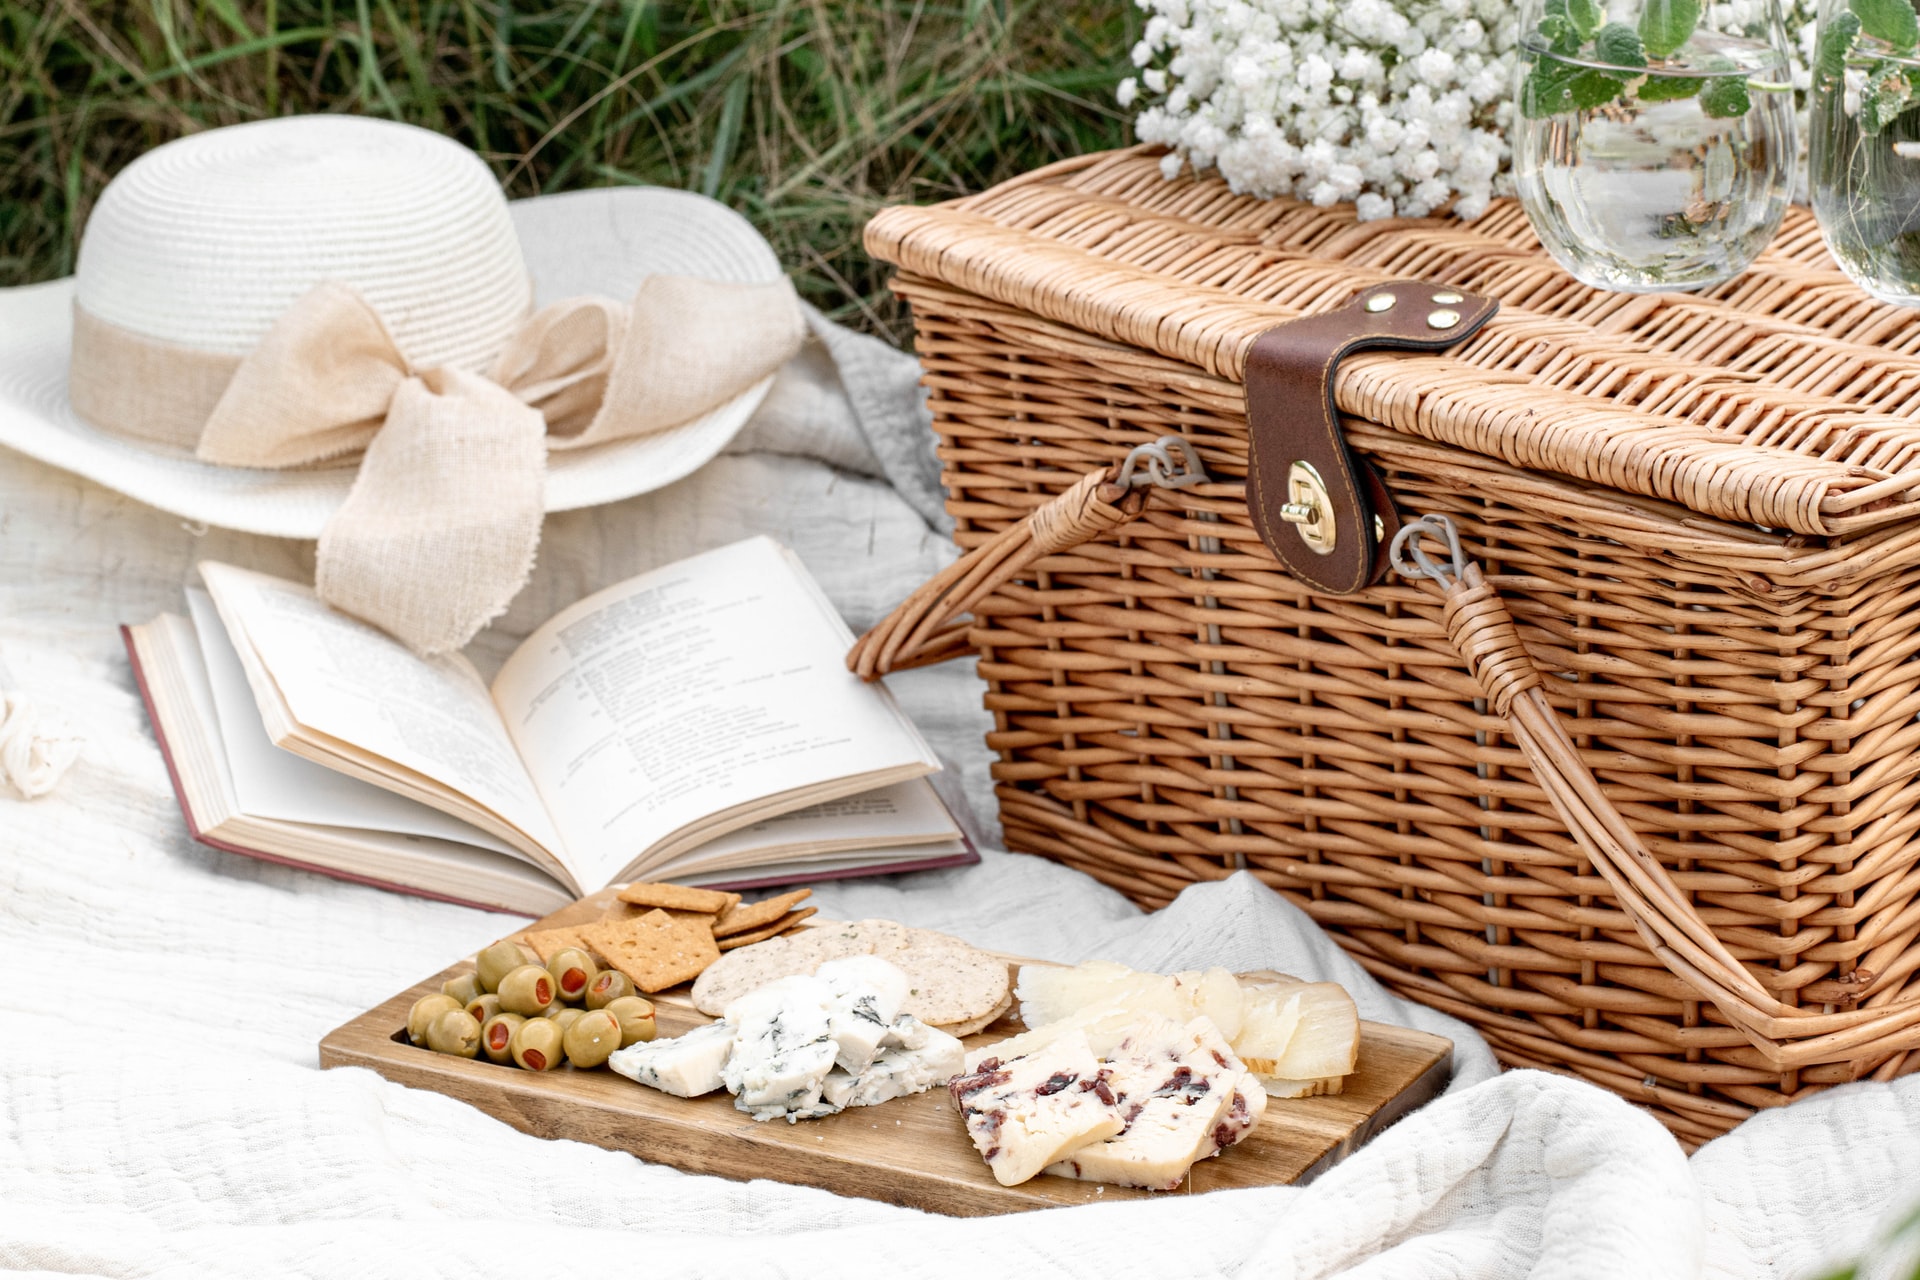 Biodegradable Tableware: How to Have a Green Picnic